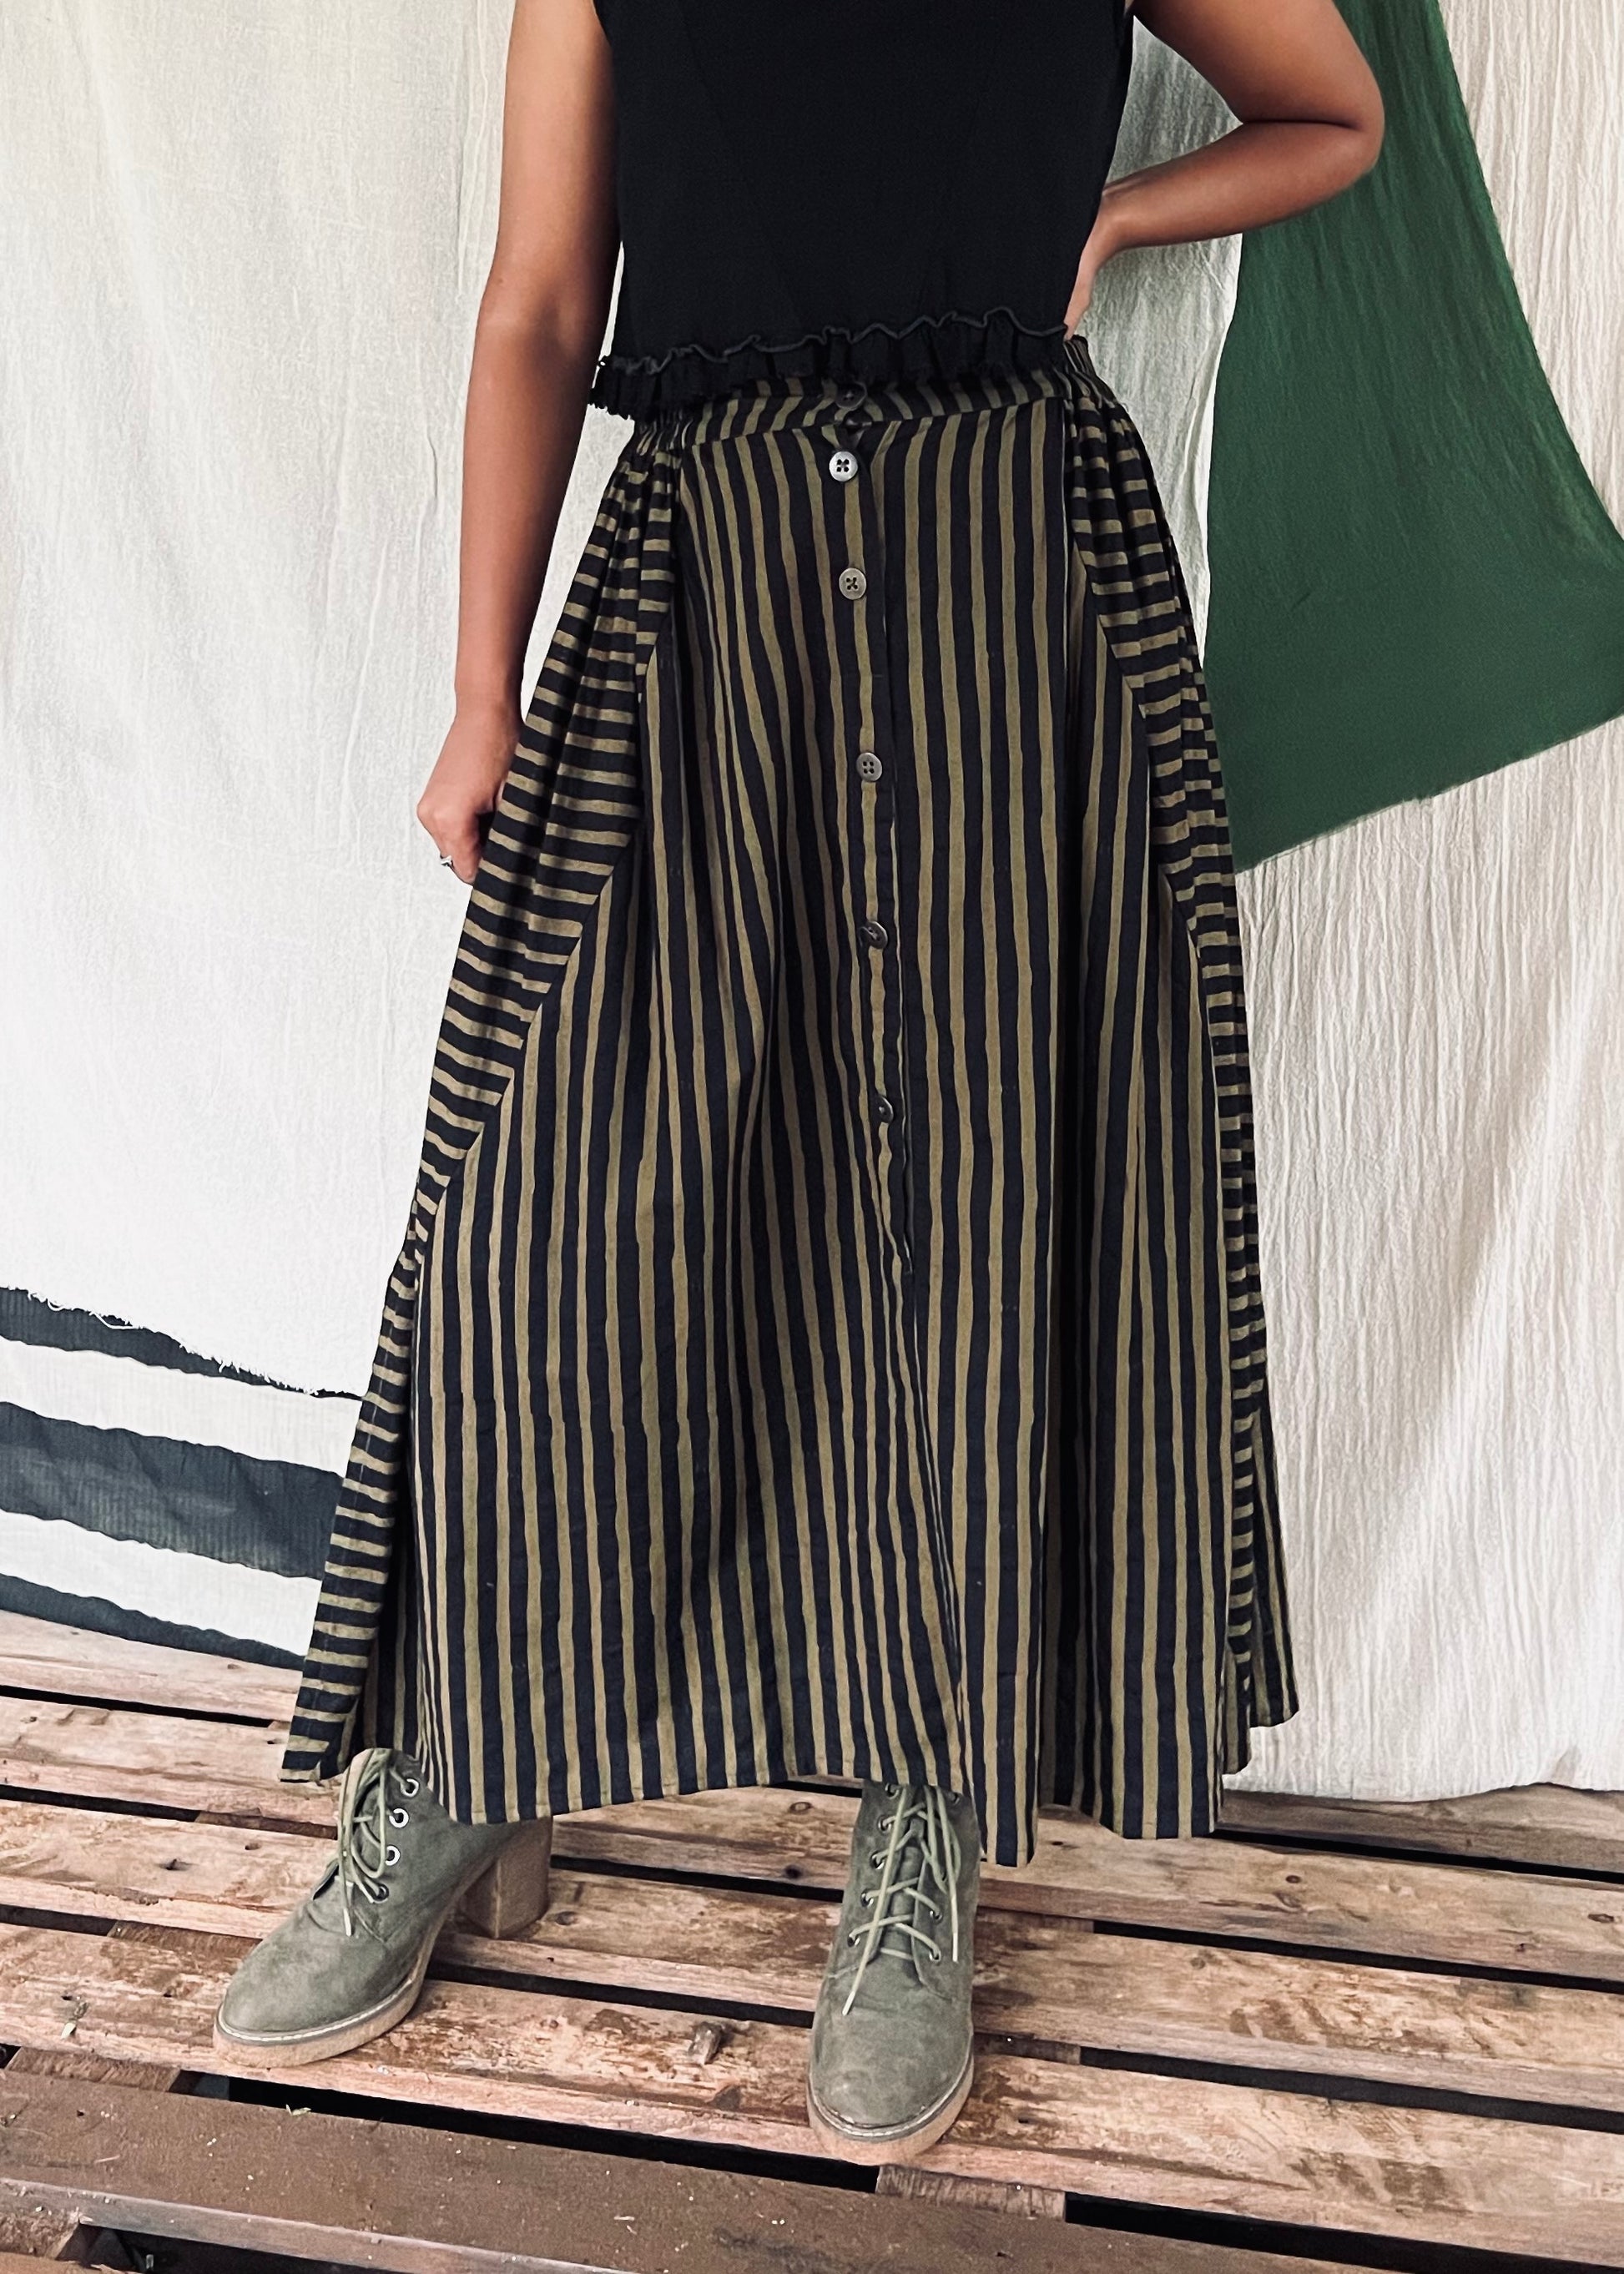 Olive and Black striped skirt